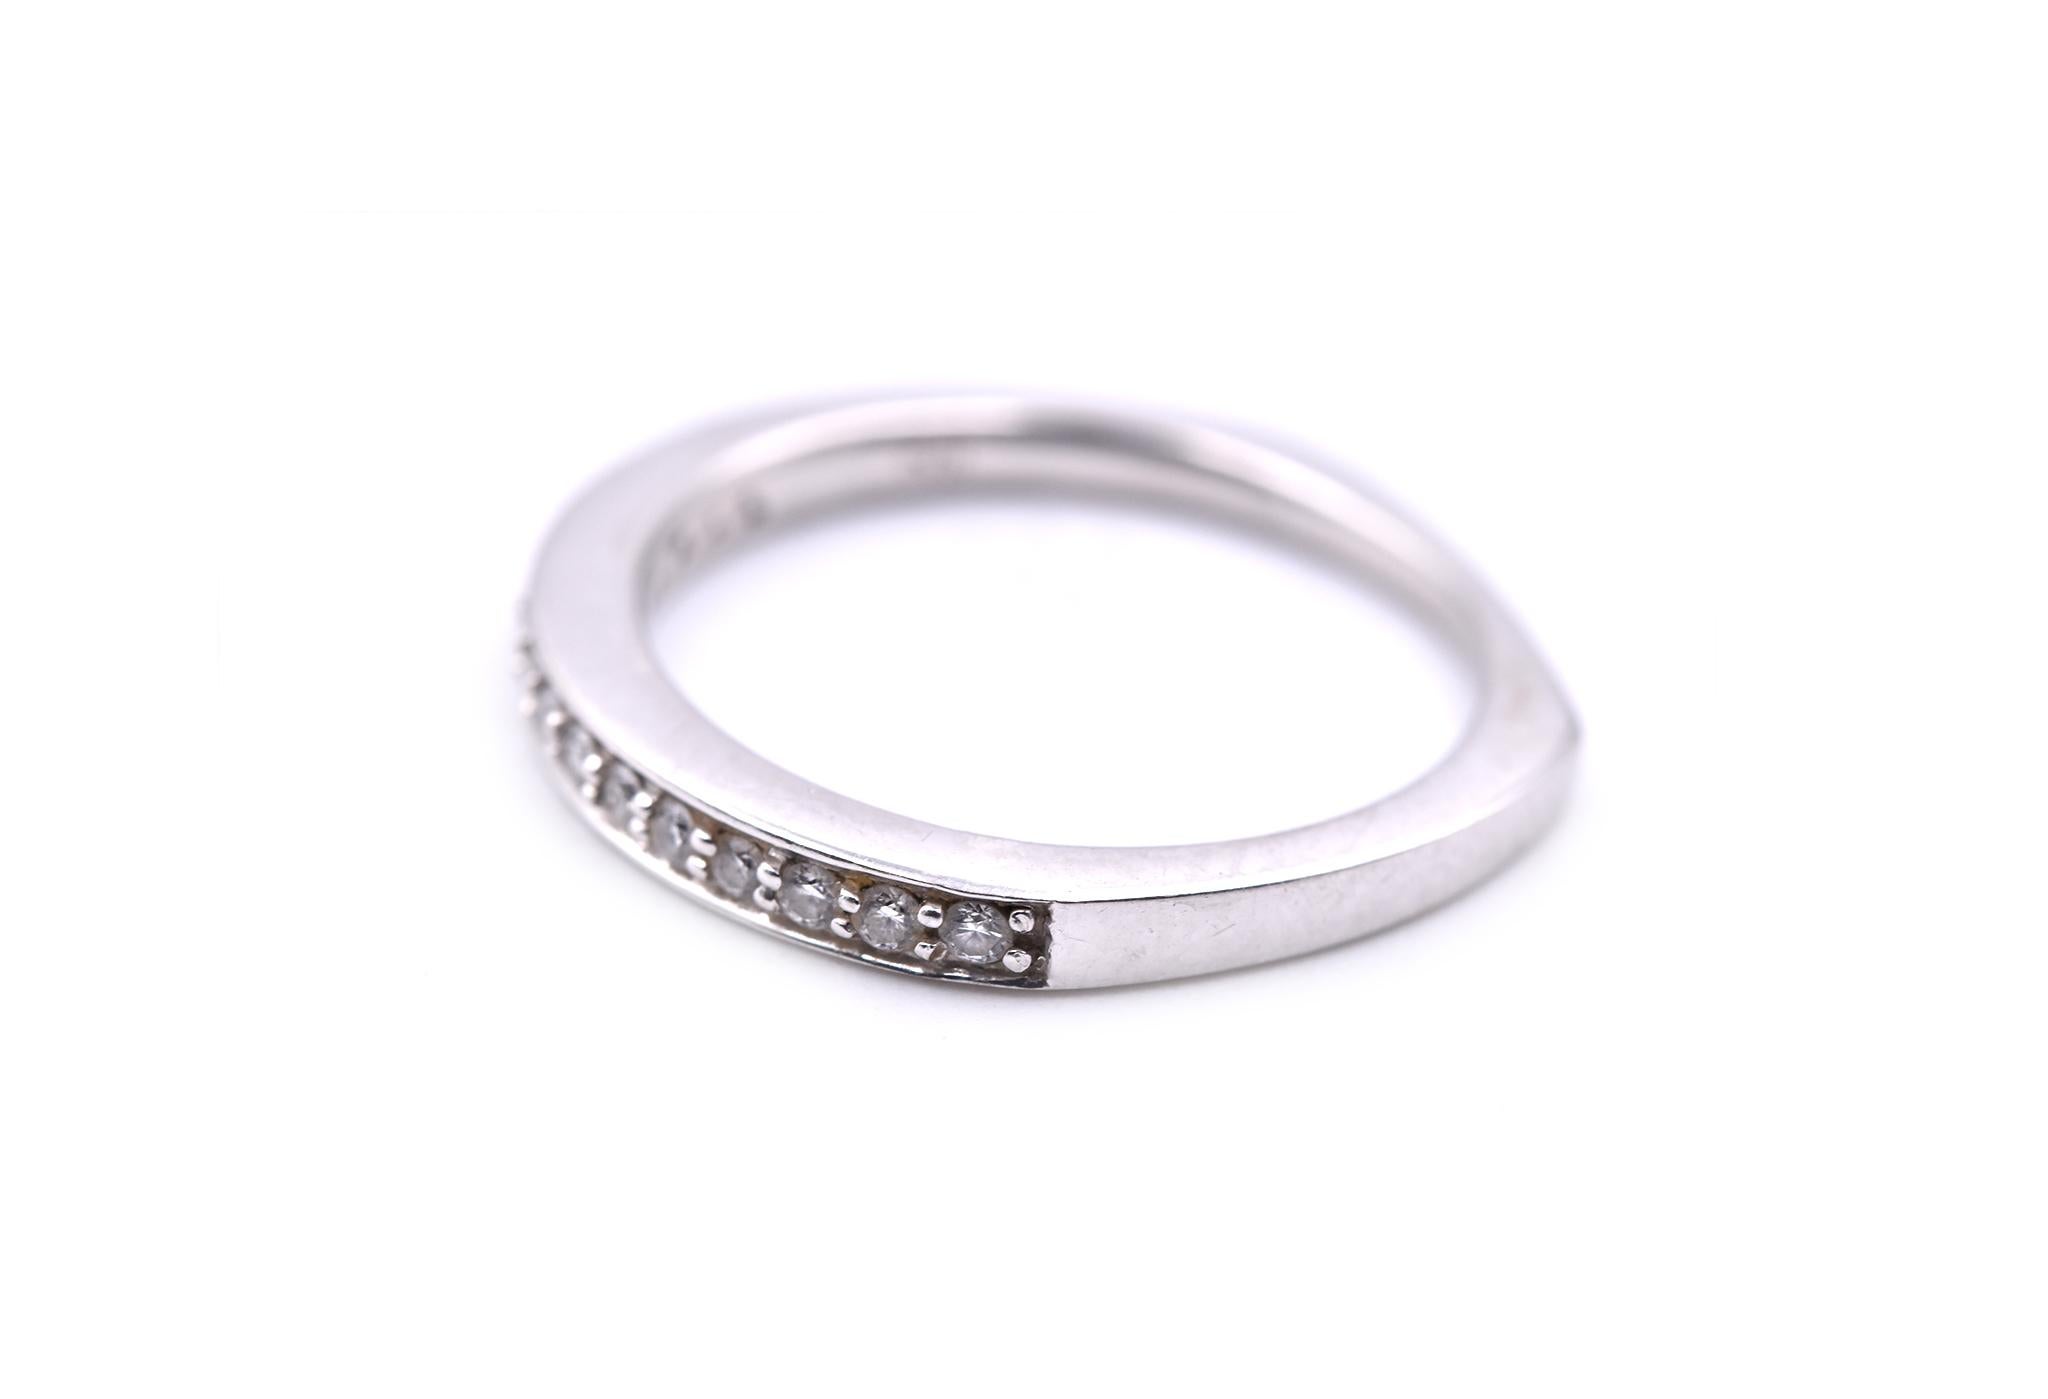 Designer: custom design
Material: 18k white gold
Diamonds: 15 round brilliant cut = .25cttw
Color: G
Clarity: VS
Ring size: 7 ½ (please allow two additional shipping days for sizing requests)
Dimensions: ring is 2.40mm wide
Weight: 3.04 grams 
